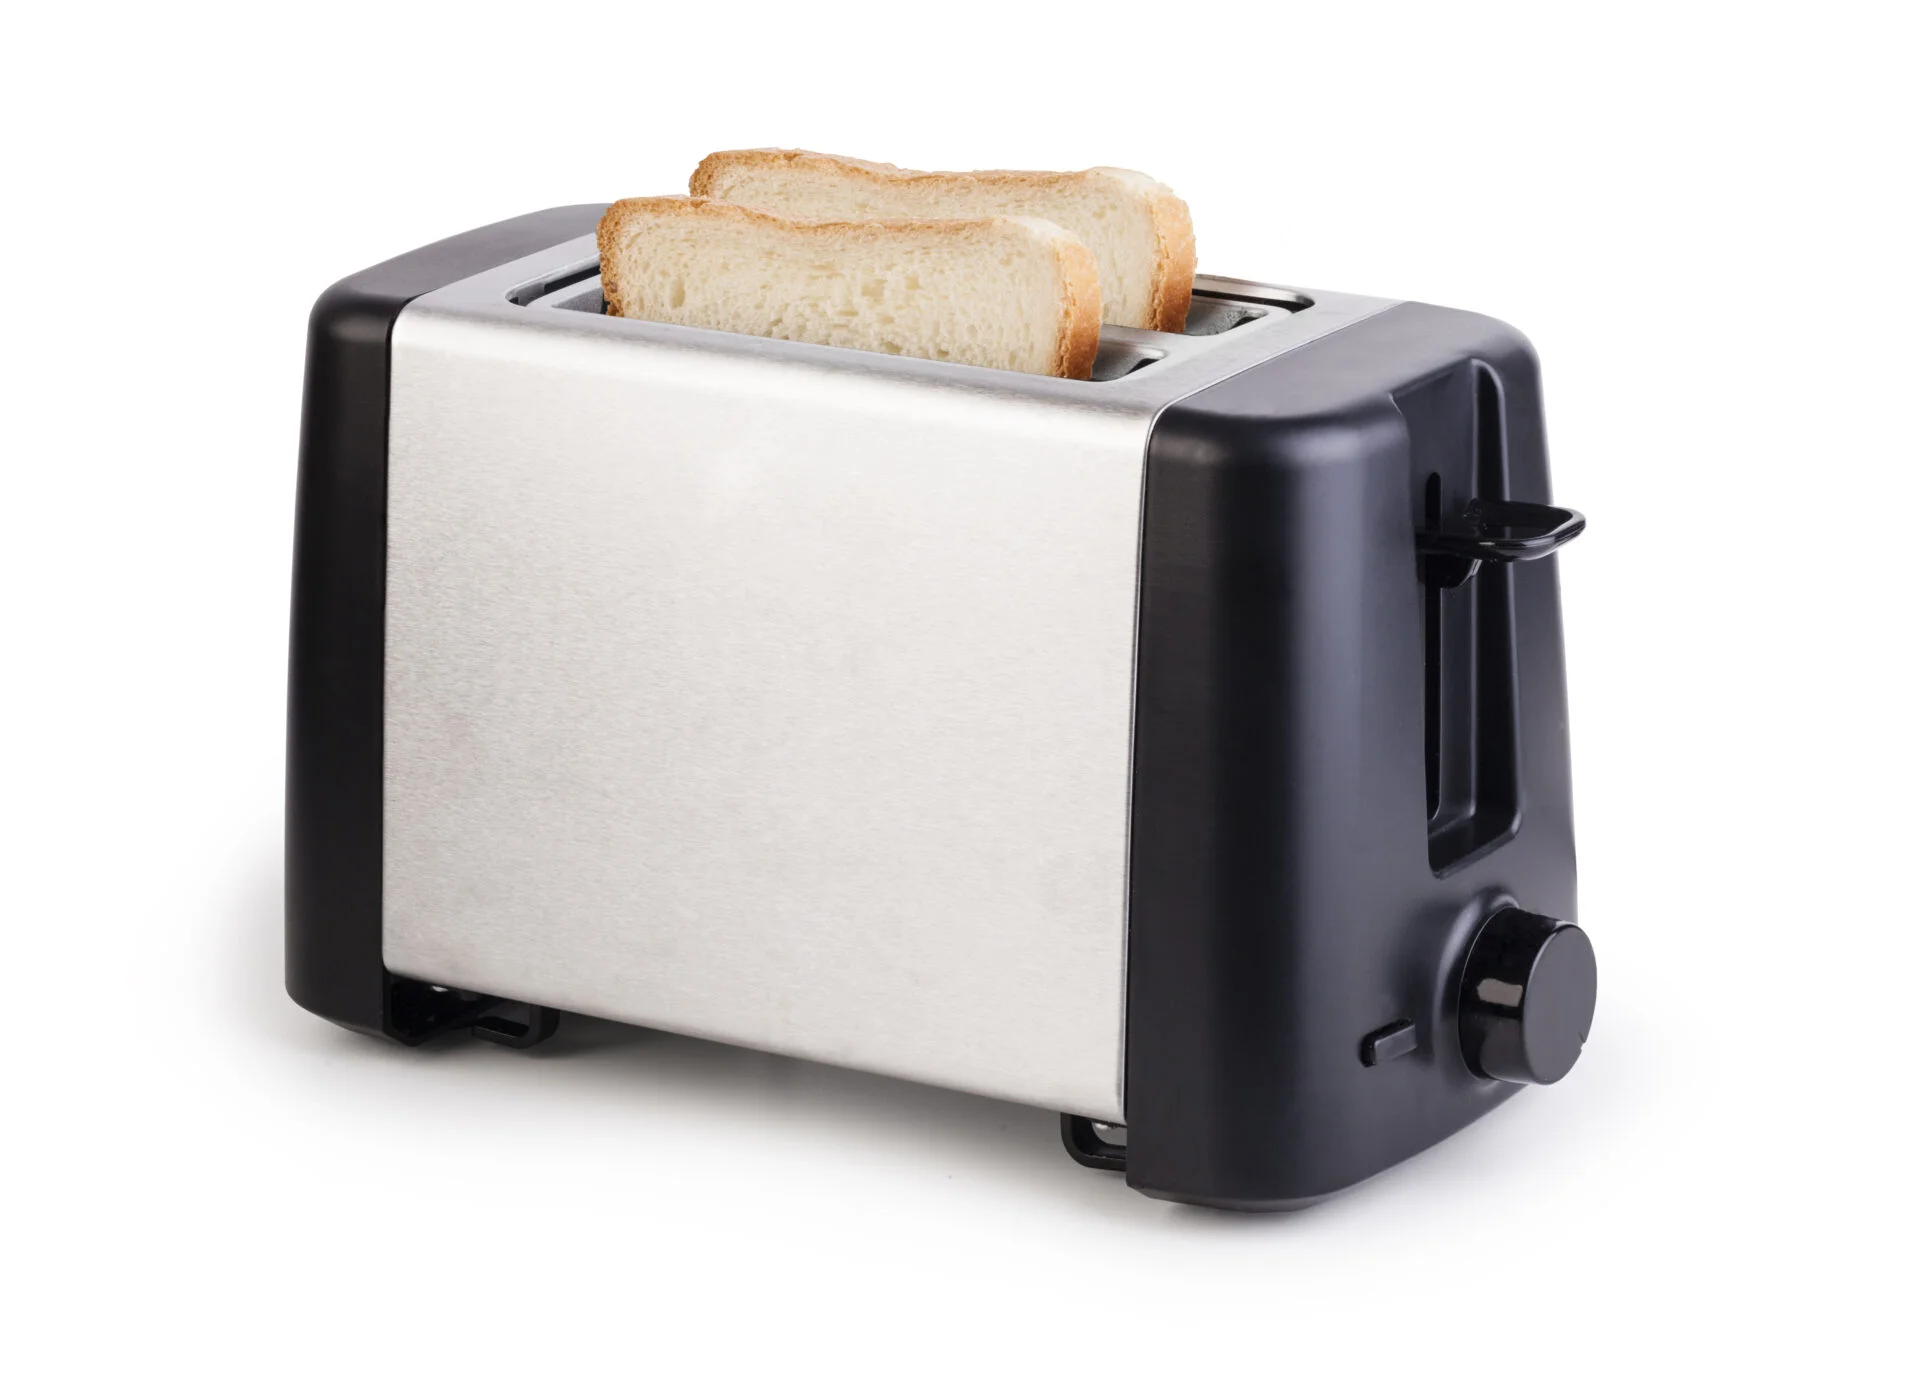 Toaster with bread isolated on white background